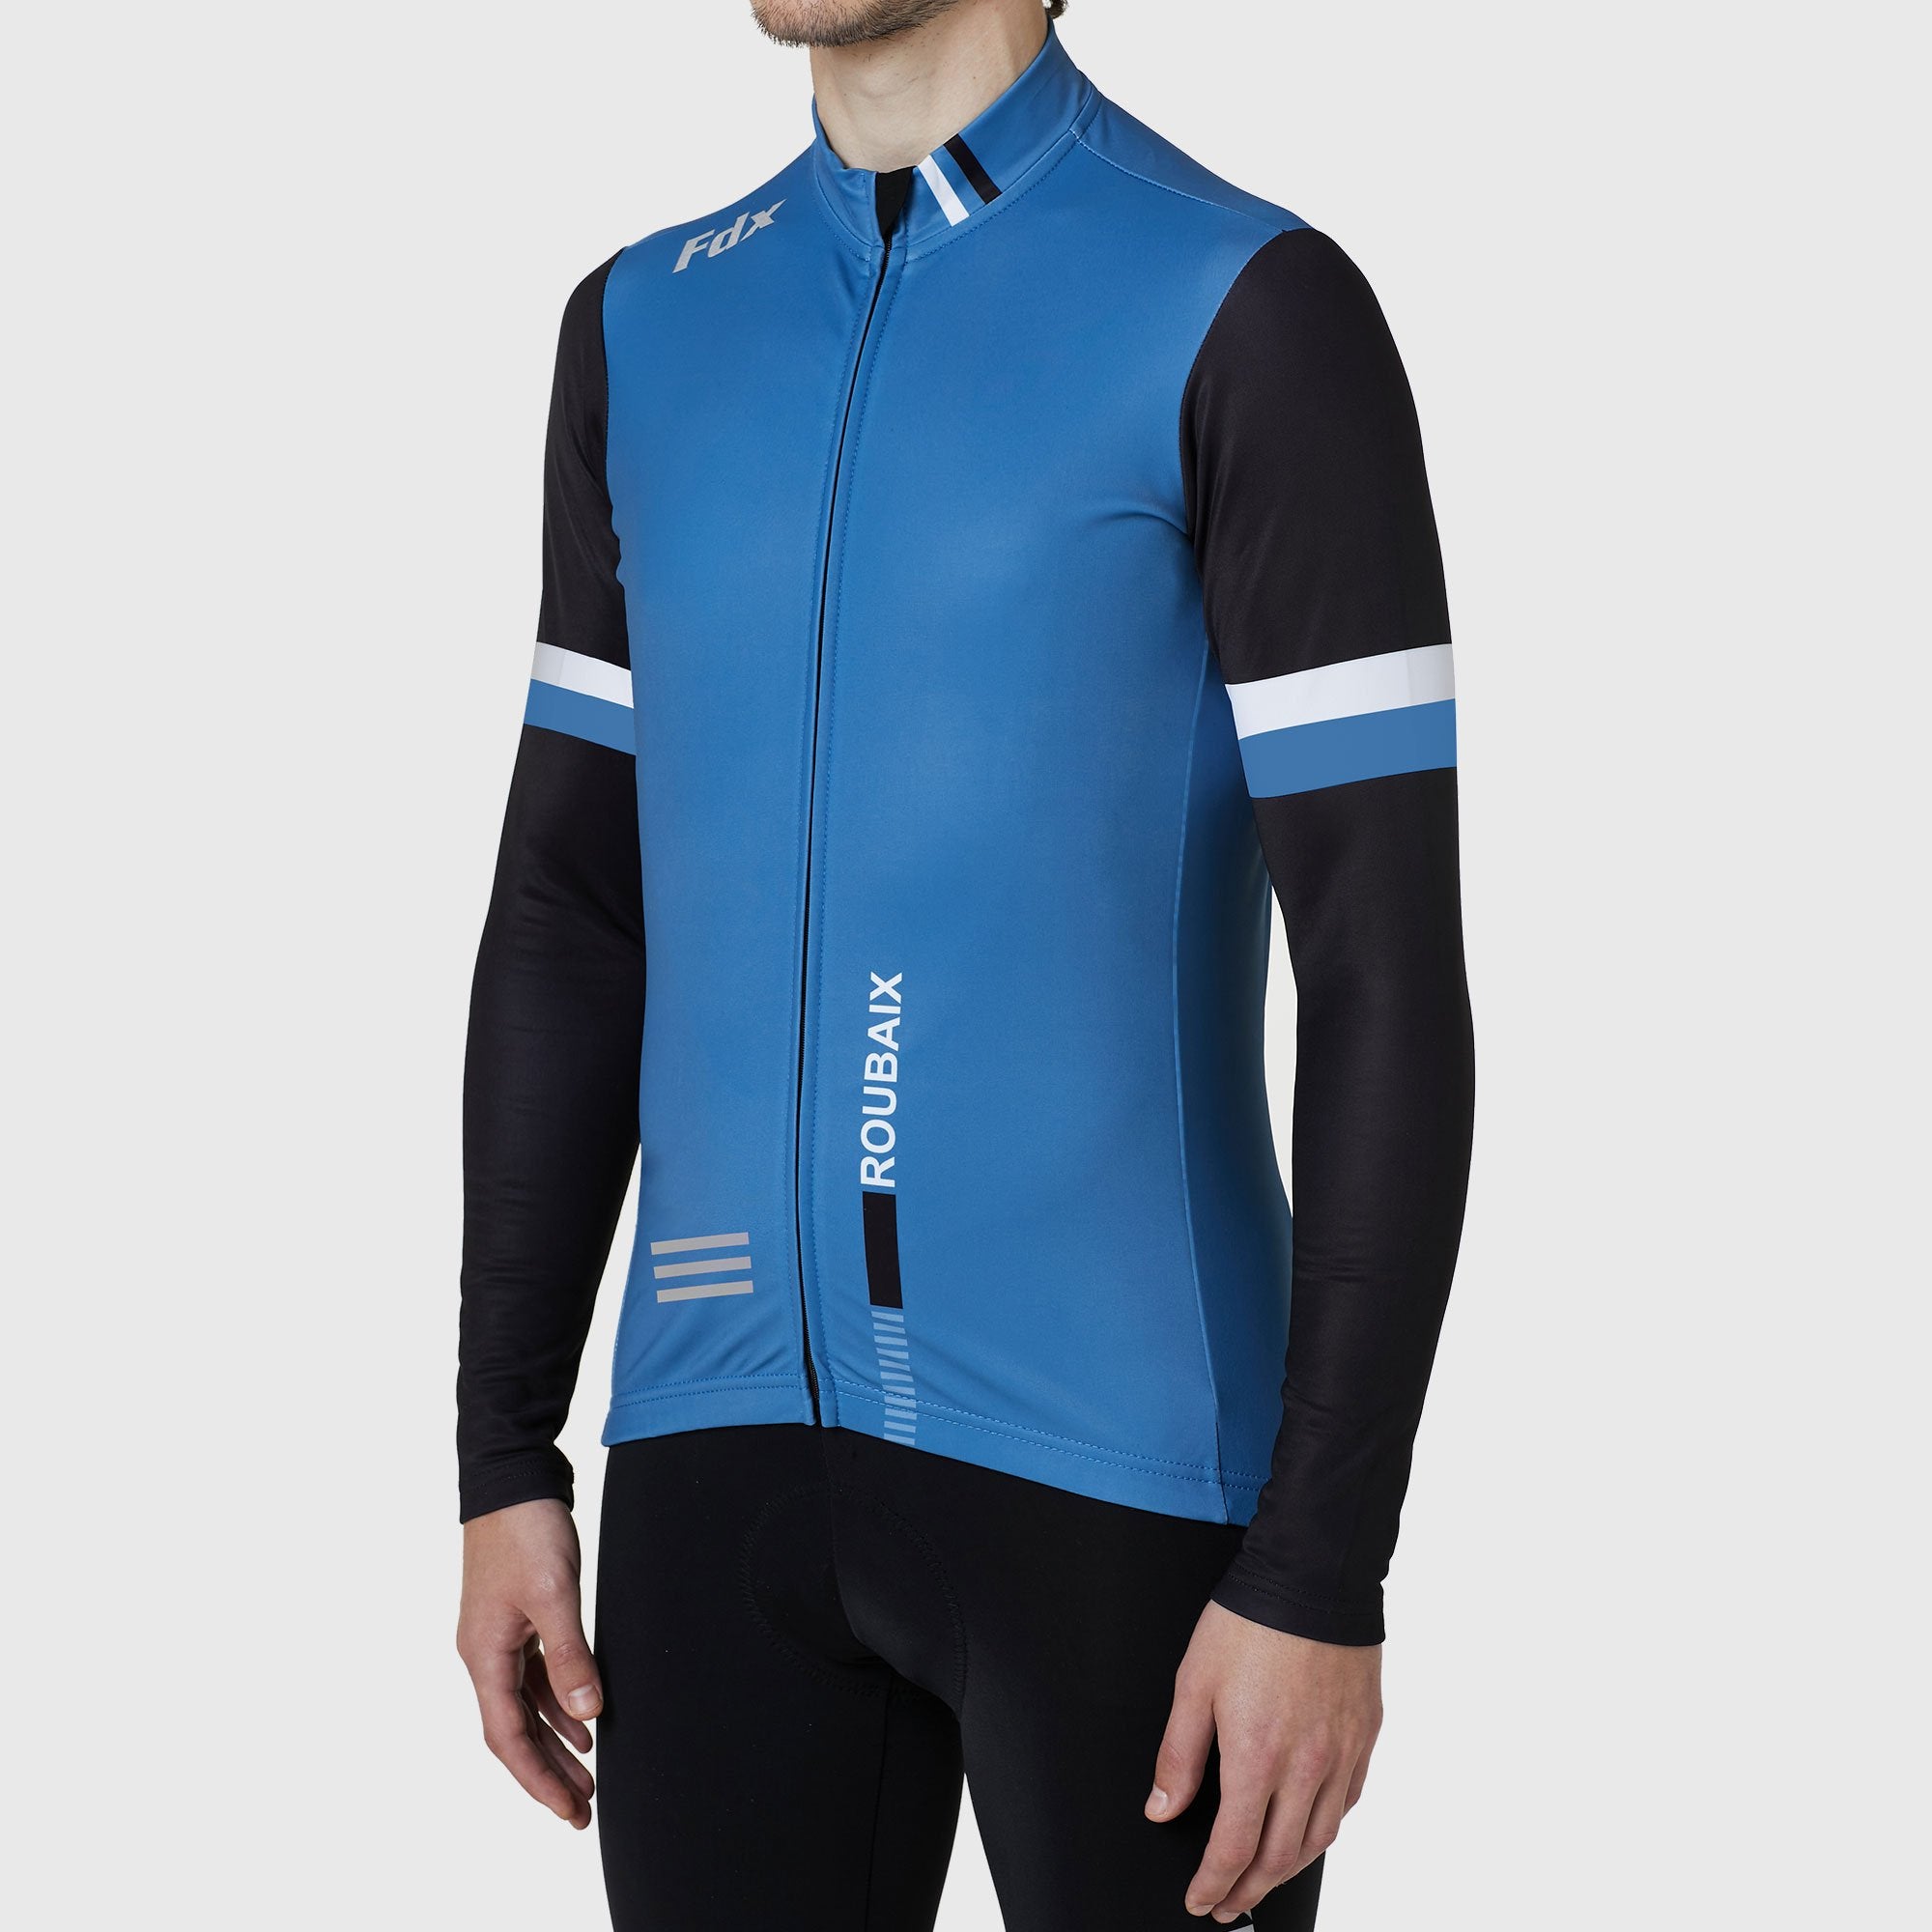 Fdx Limited Edition Men's Blue Thermal Roubaix Long Sleeve Cycling Jersey